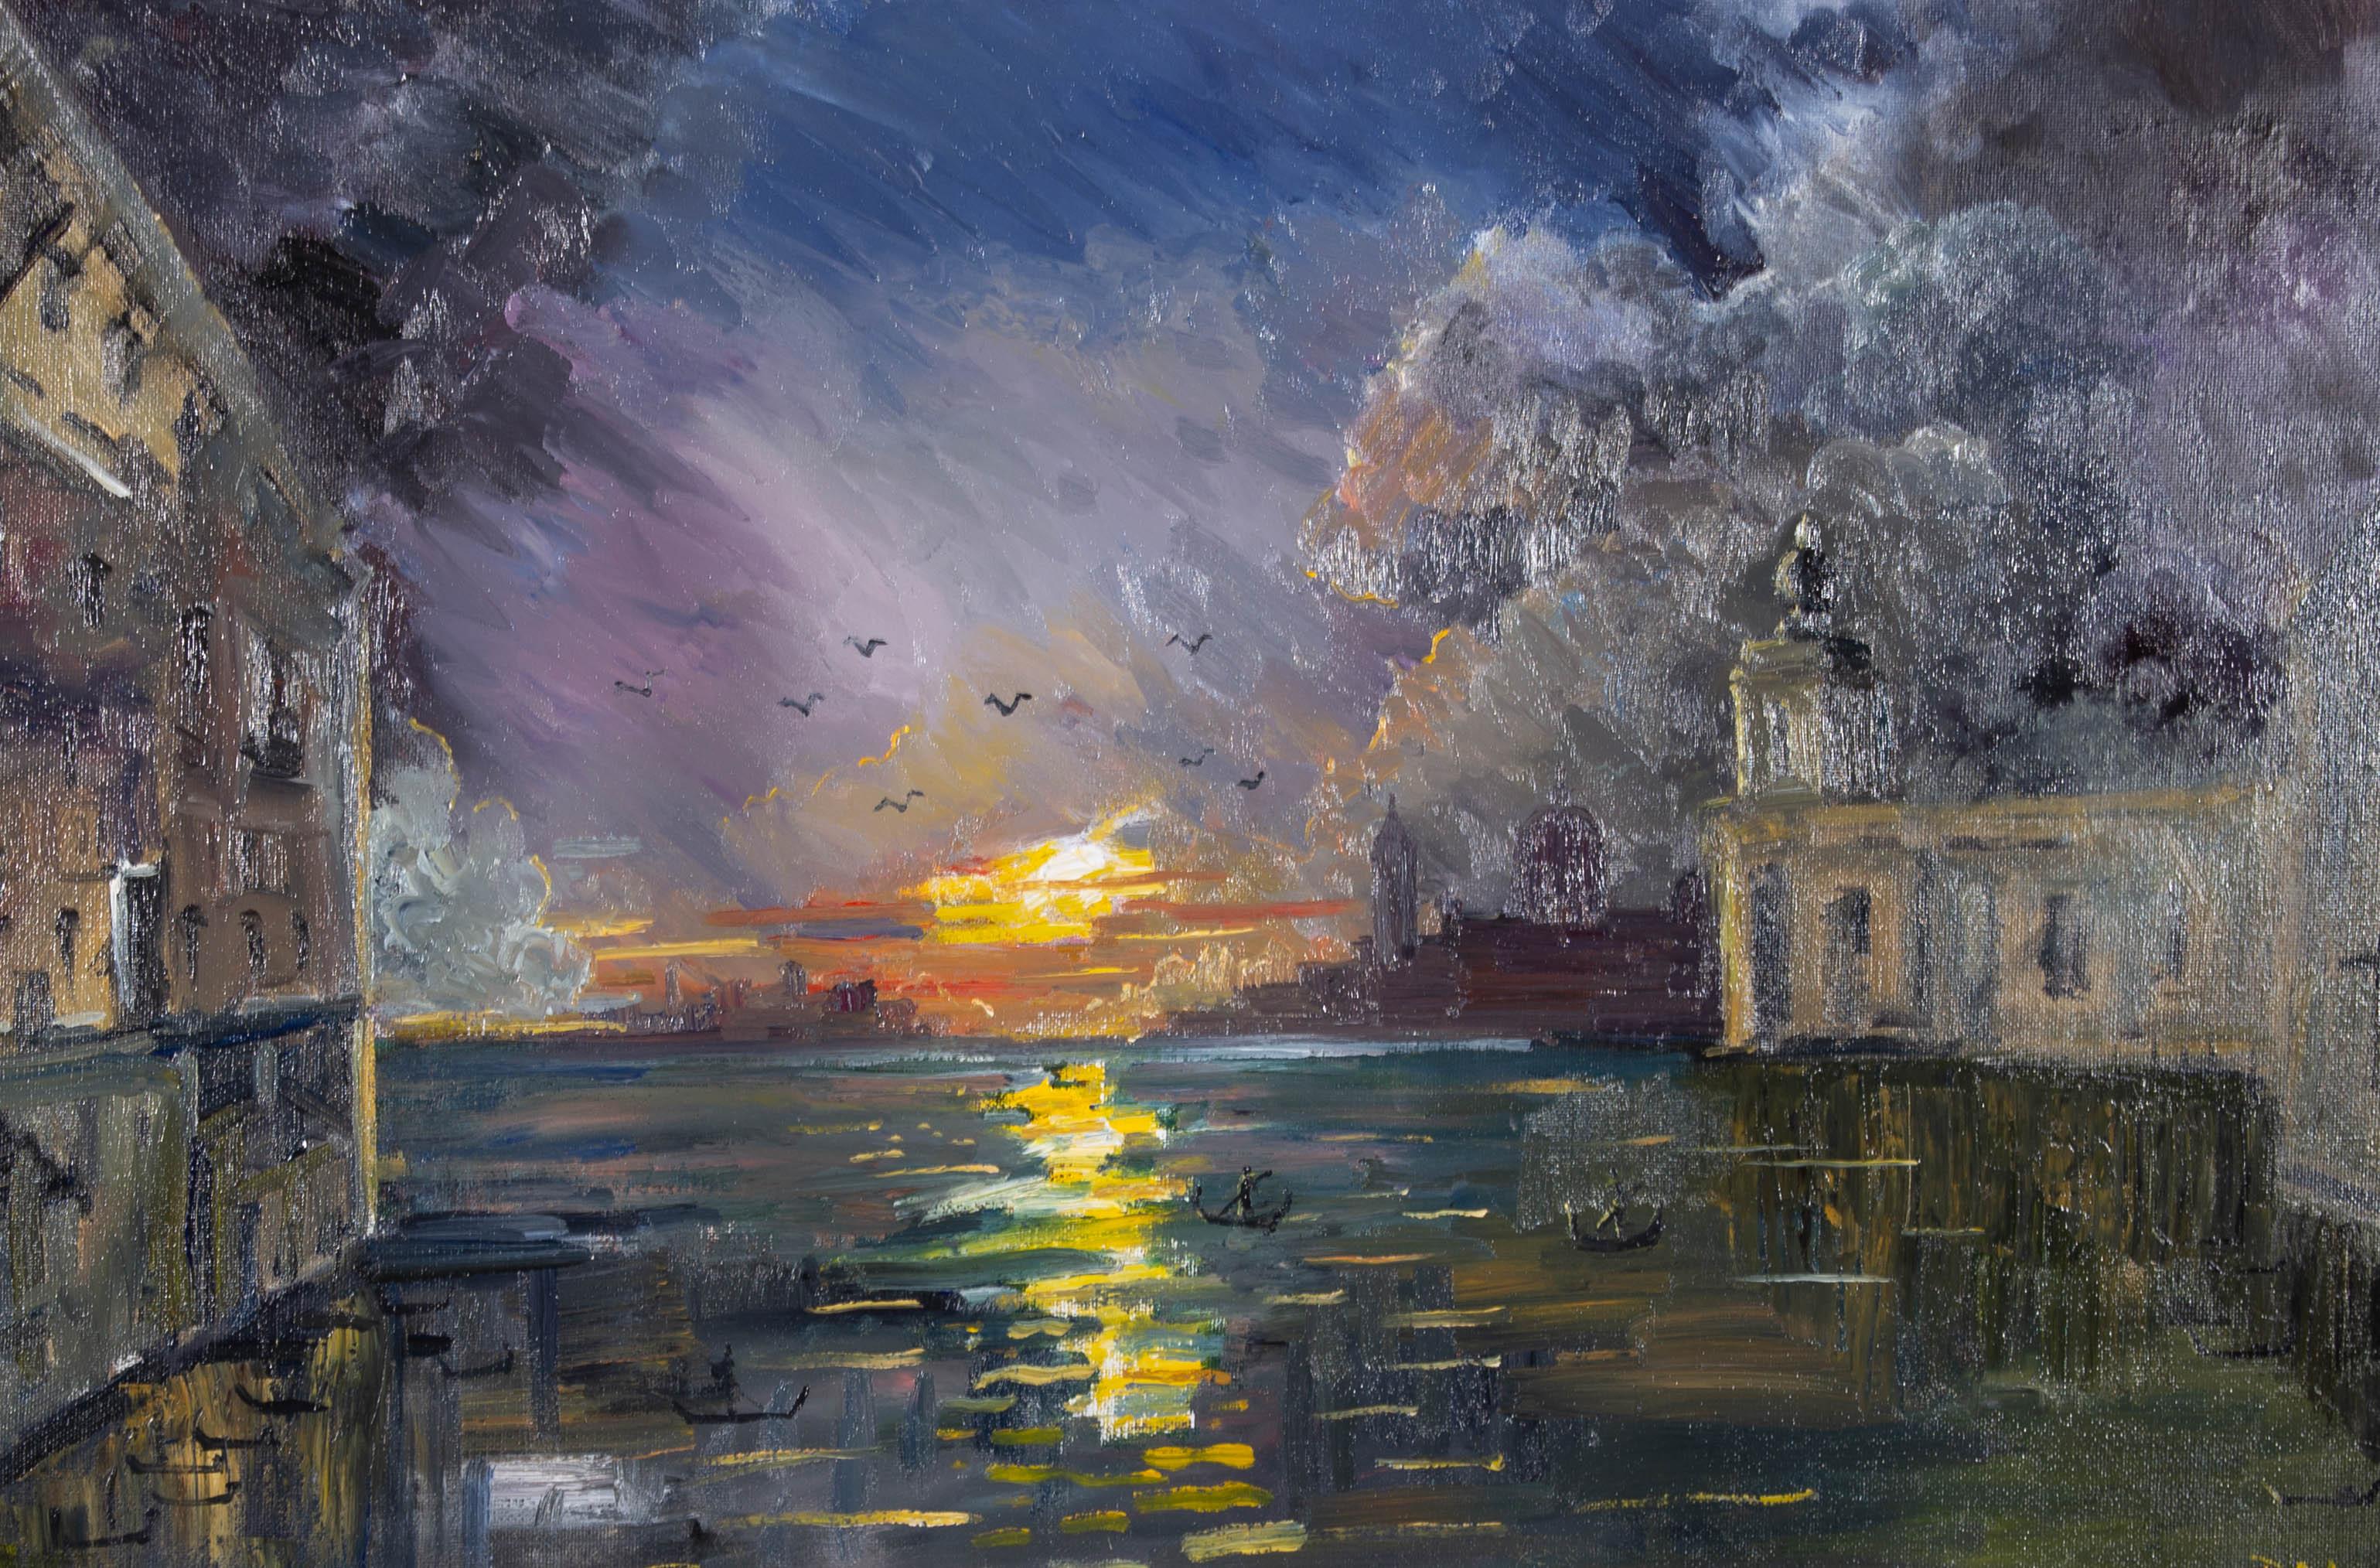 A vibrant Venetian view with a dramatic, colourful sunset. The artist has initialed to the lower right corner. On canvas.
